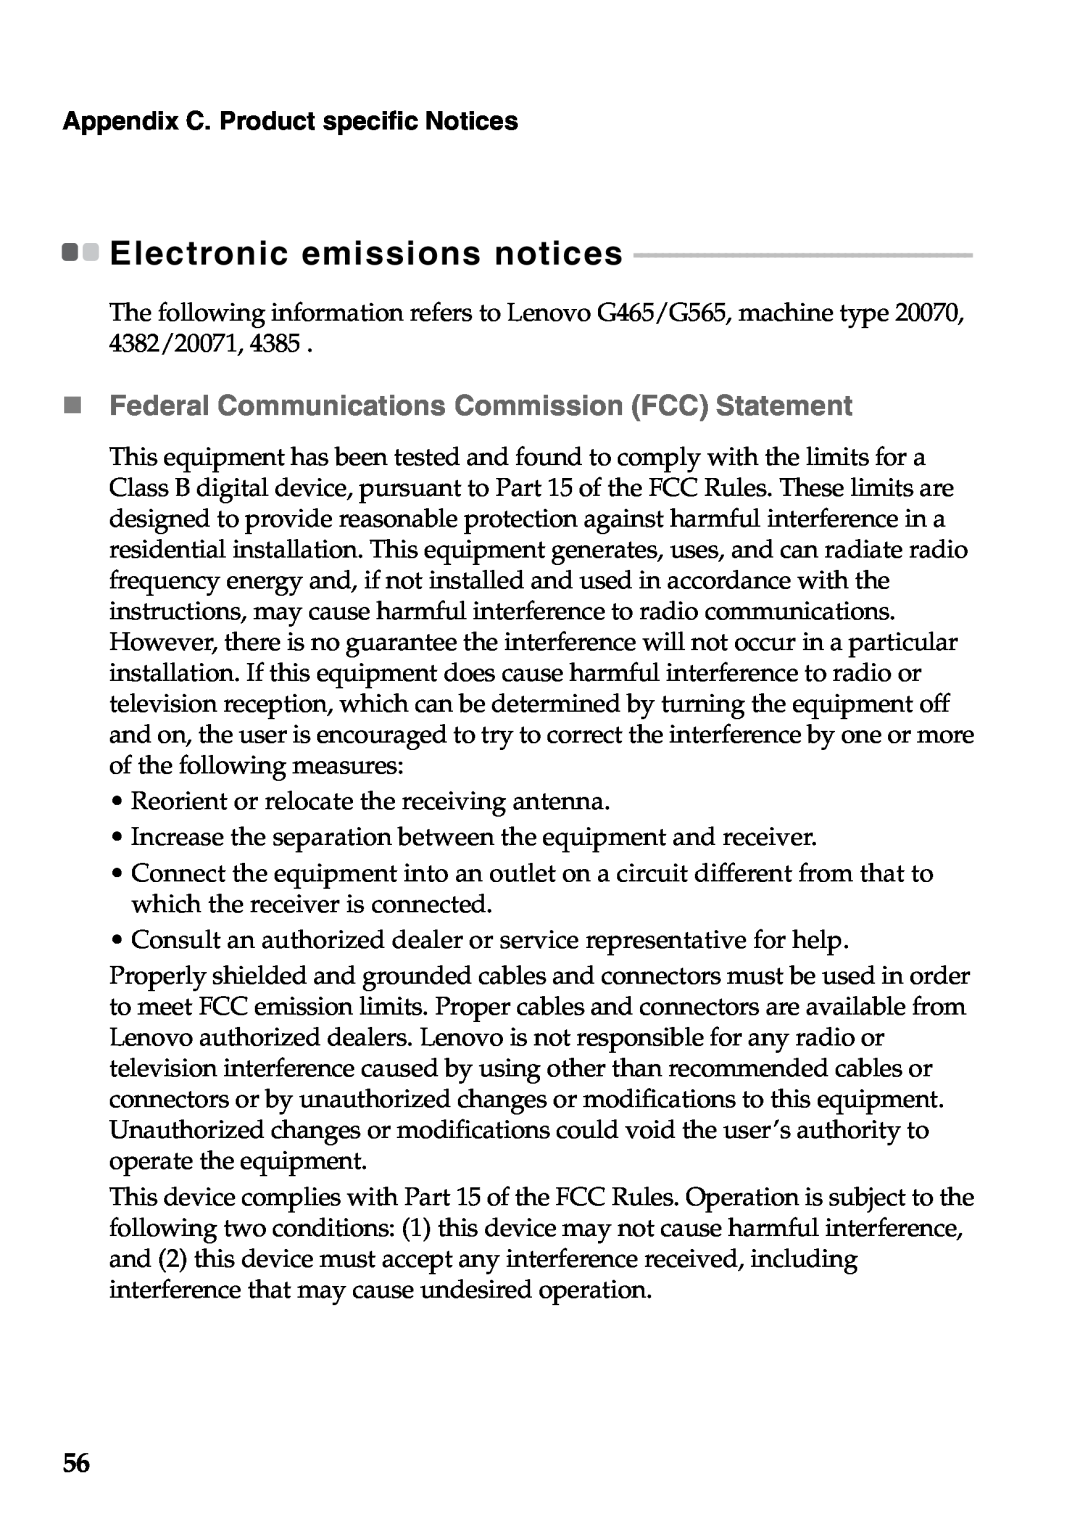 Lenovo G565, G465 manual Electronic emissions notices, „ Federal Communications Commission FCC Statement 